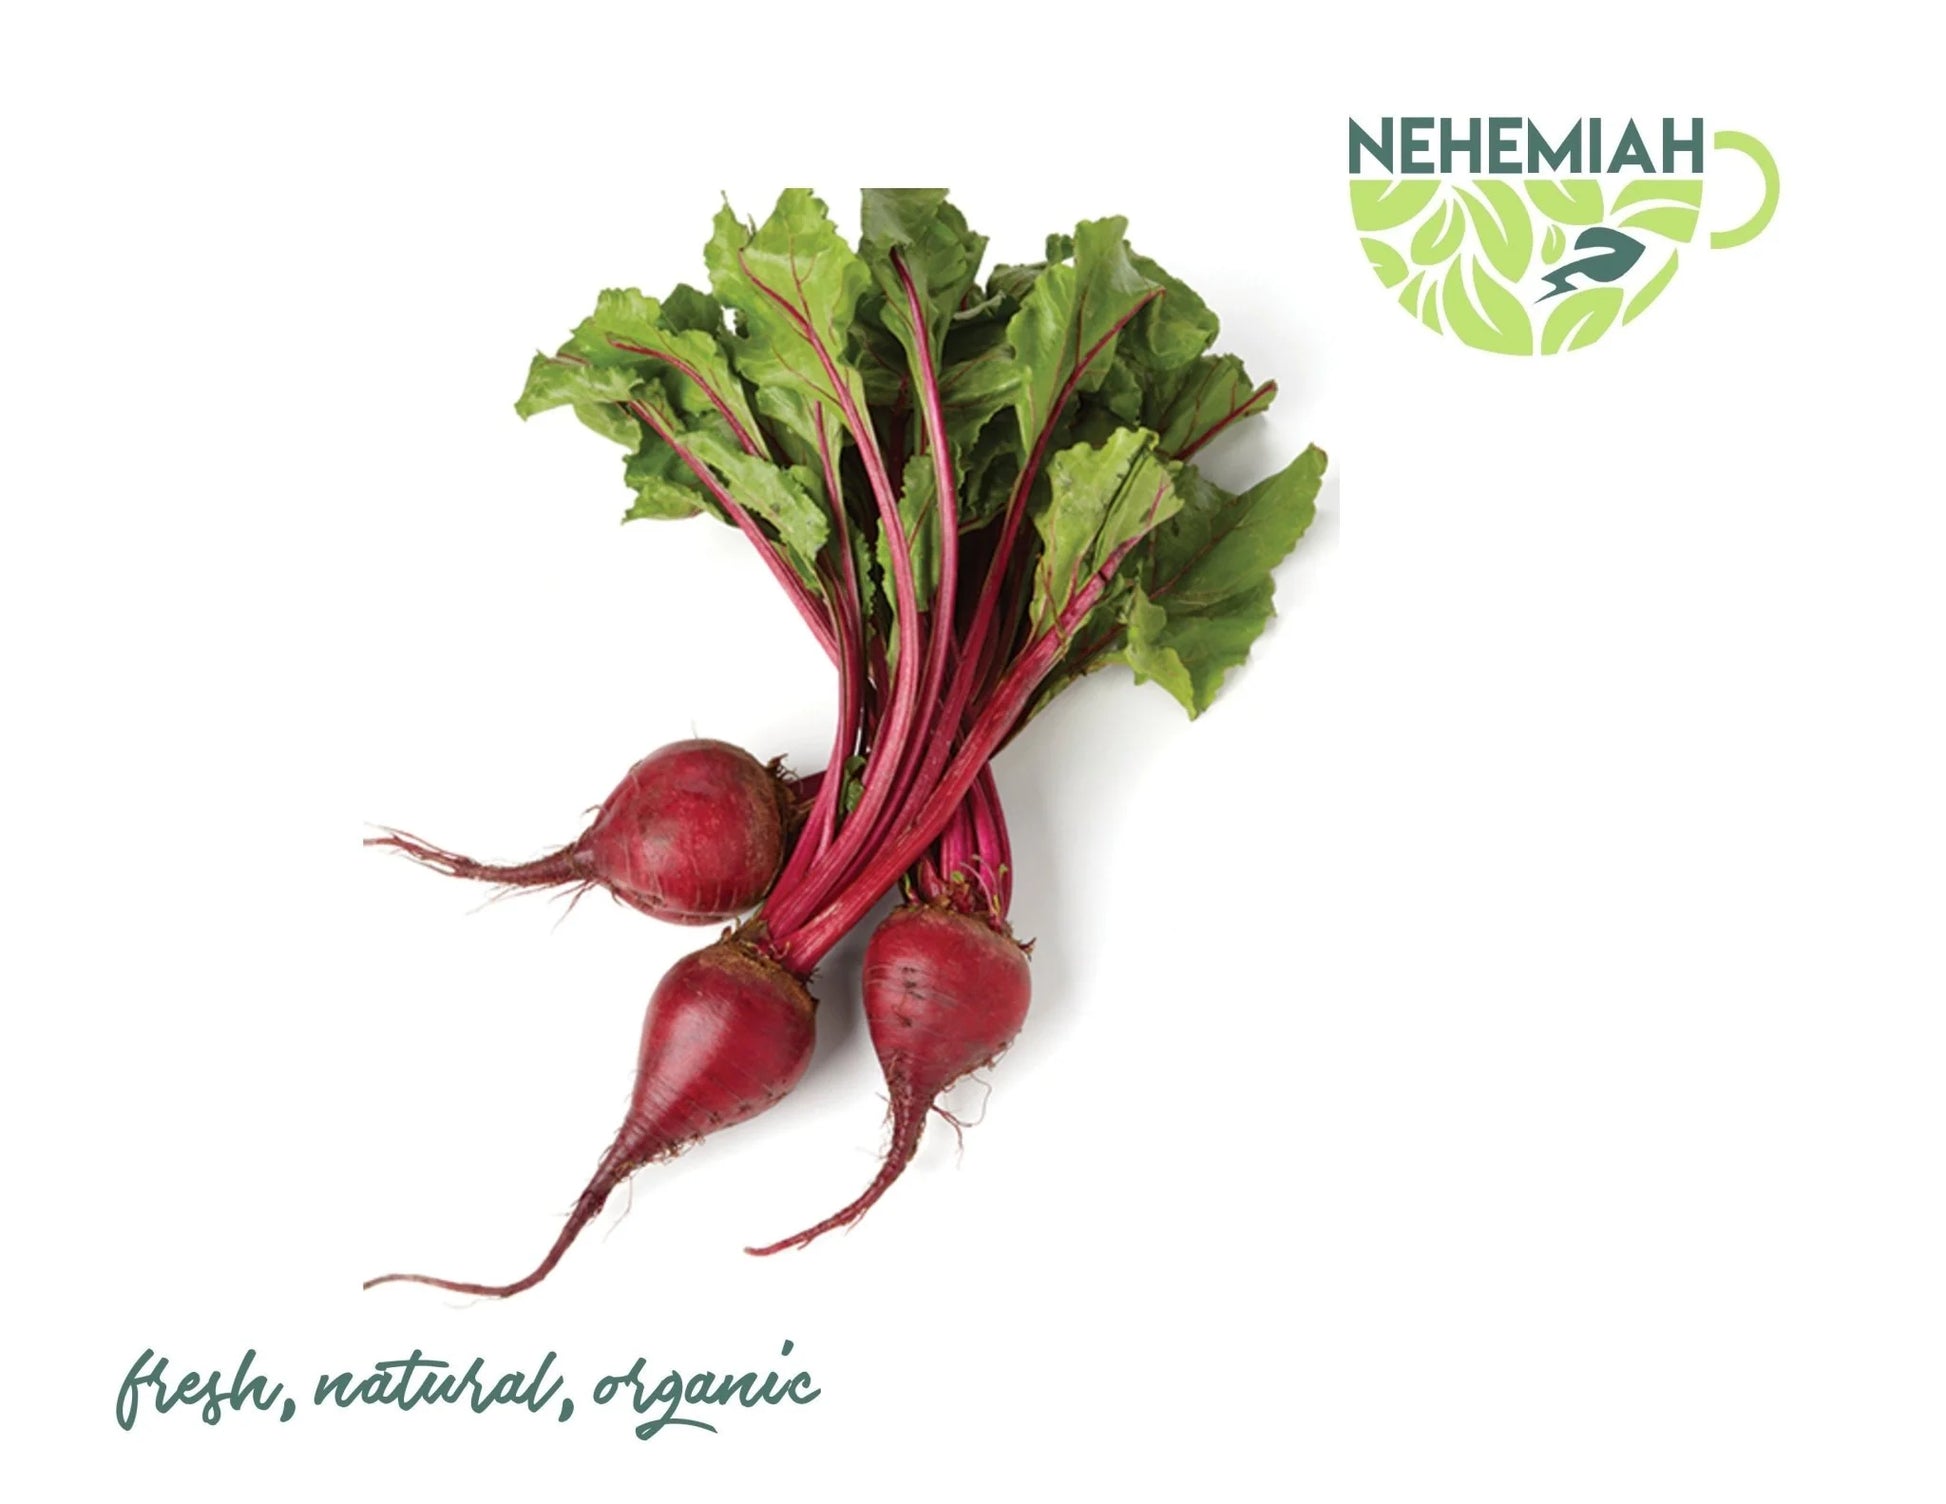 Nehemiah Superfood Red Beets